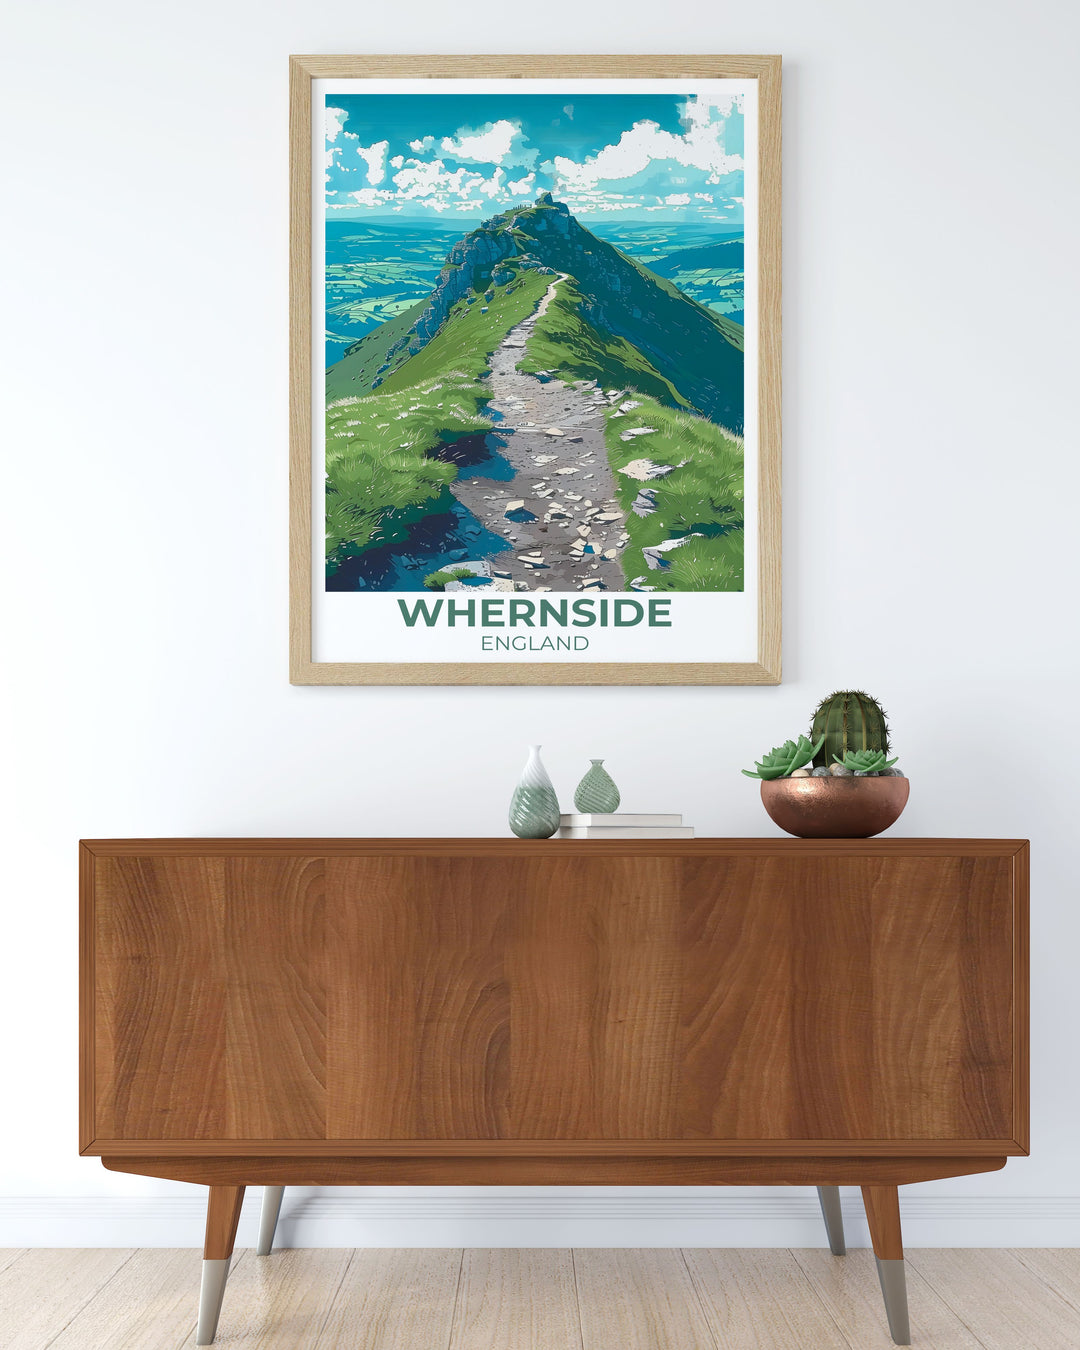 Elegant gallery wall art of Whernside, showcasing the beauty of its rugged summit and expansive views. This artwork creates a focal point that brings the natural elegance of the Yorkshire Dales into your home.